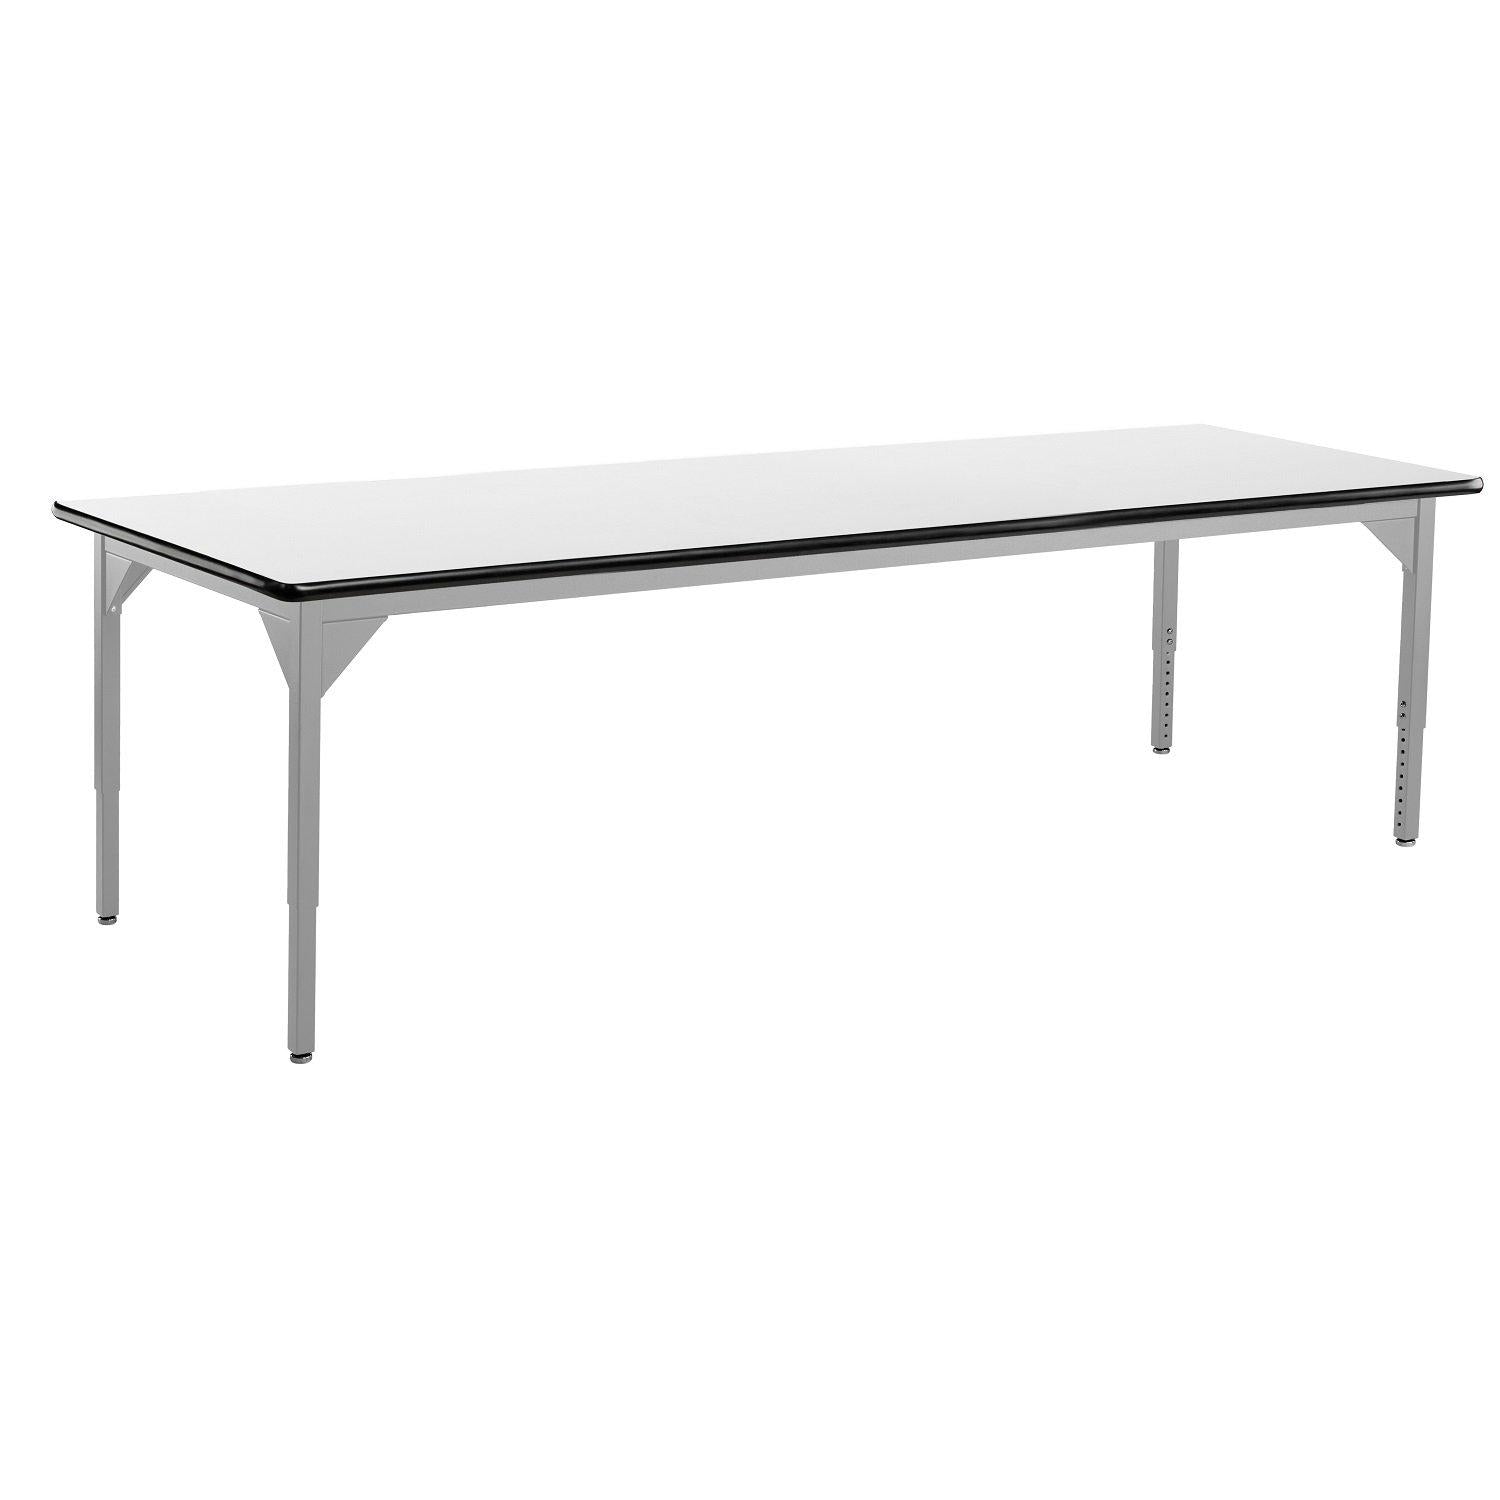 Heavy-Duty Height-Adjustable Utility Table, Soft Grey Frame, 48" x 72", Whiteboard High-Pressure Laminate Top